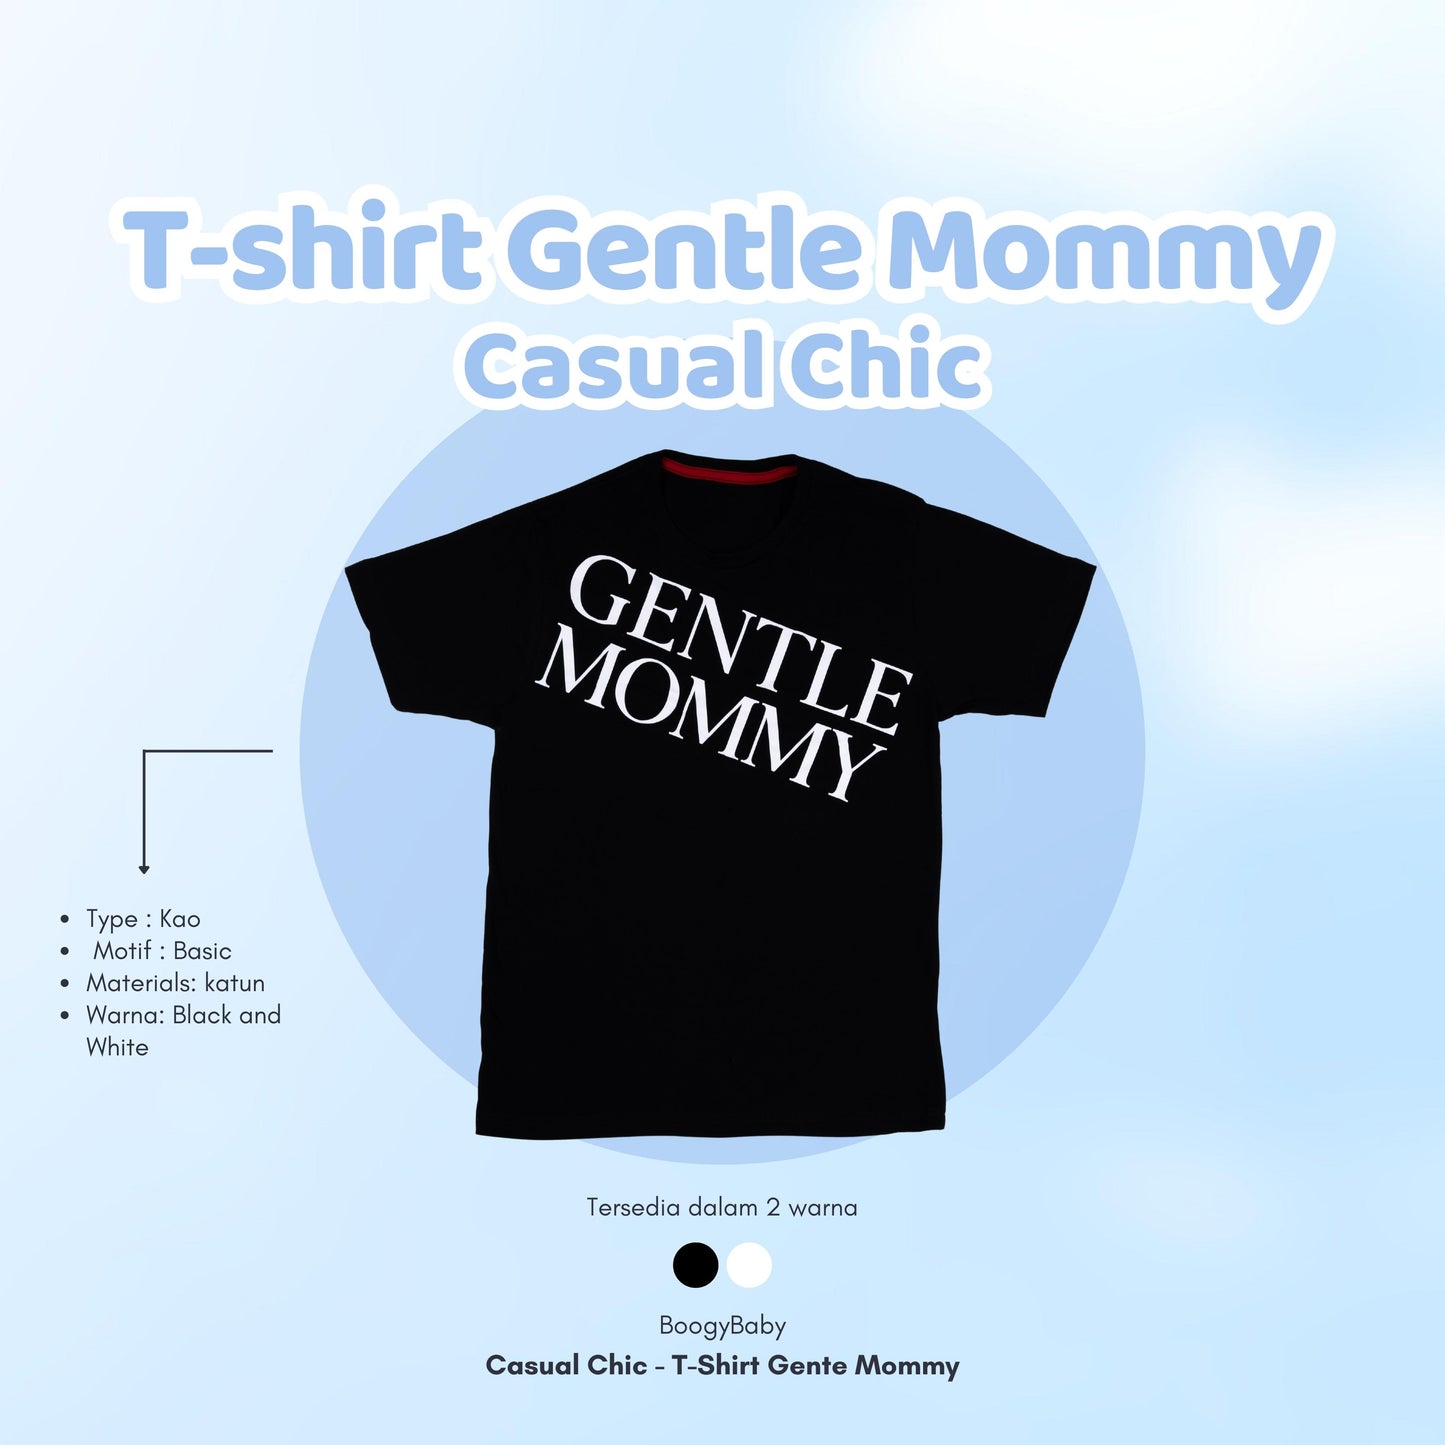 T Shirt Gentle Mommy (Casual Chic)